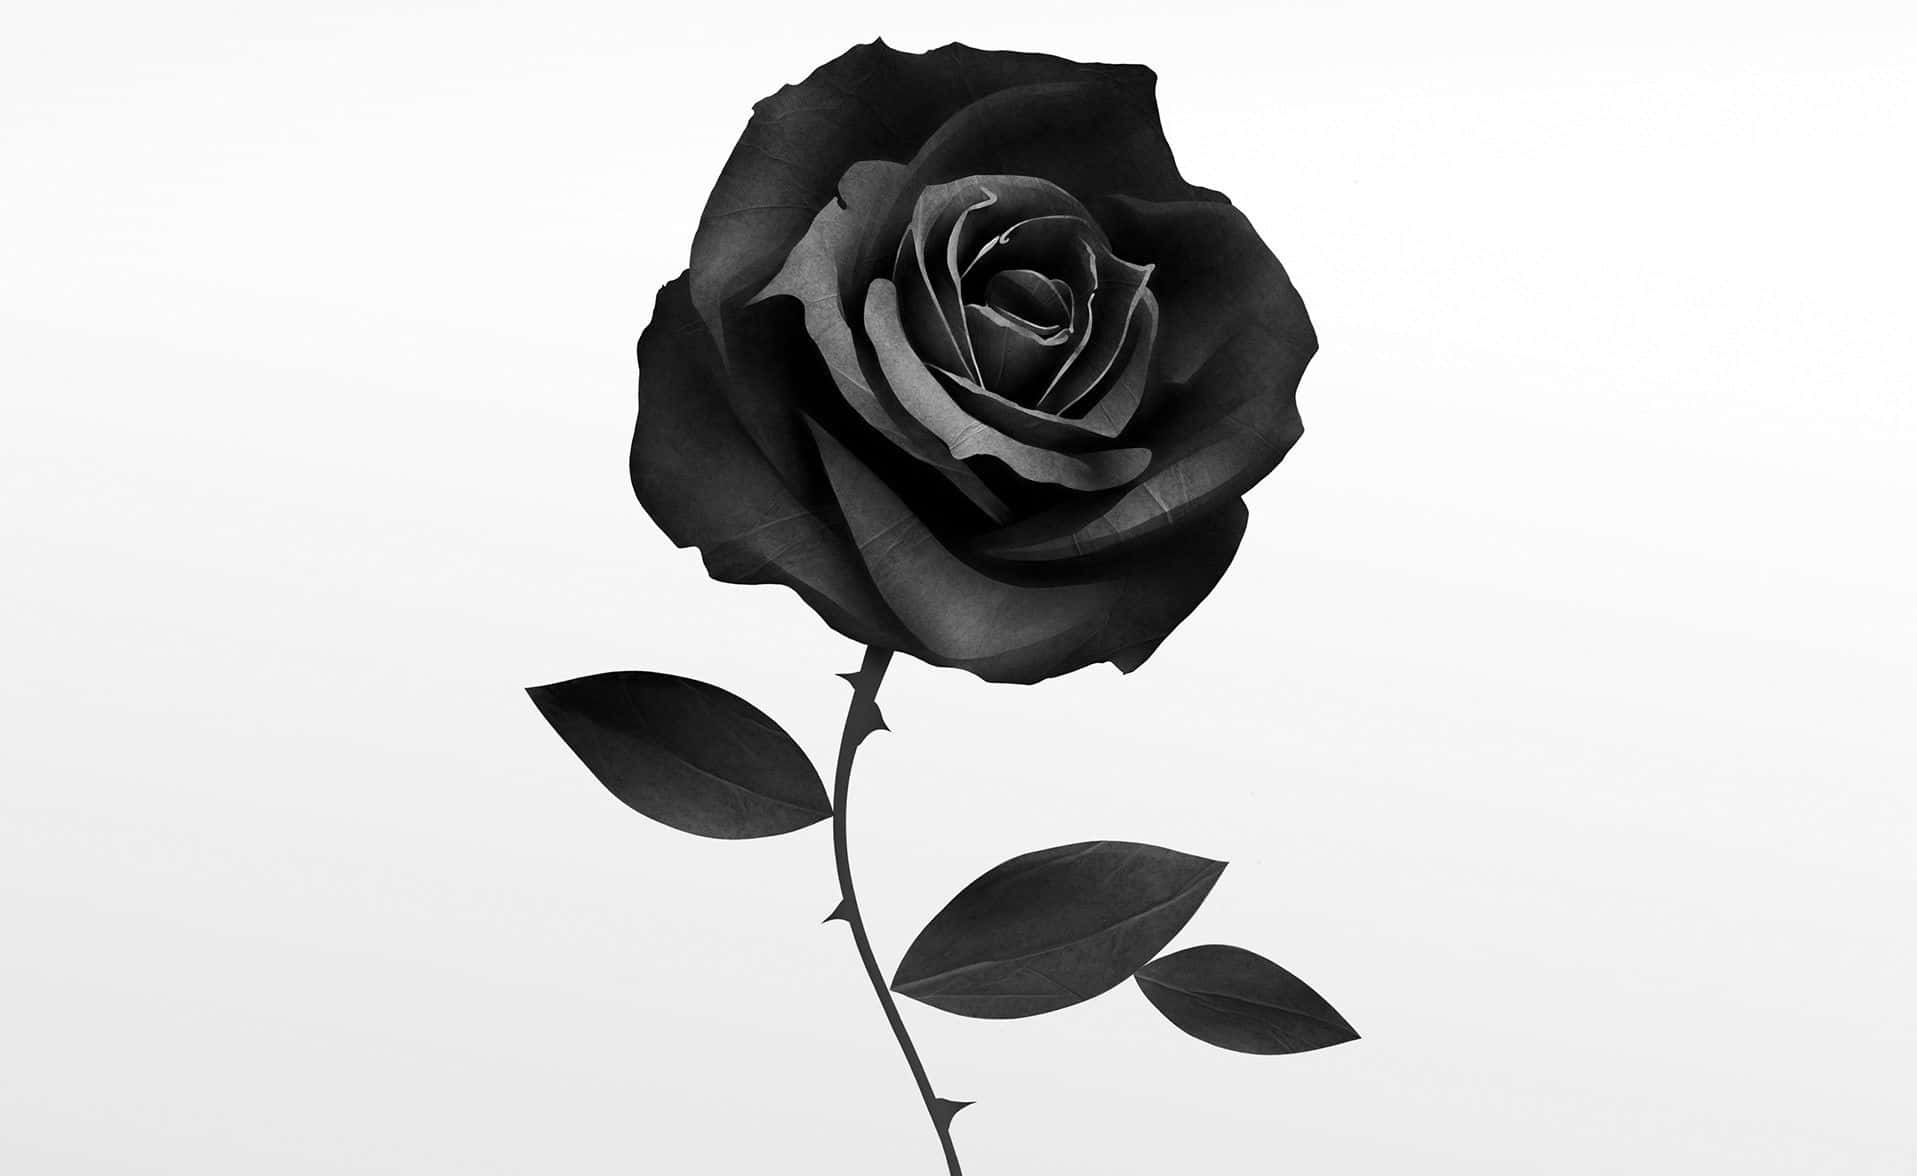 A Black Rose Is Shown Against A White Background